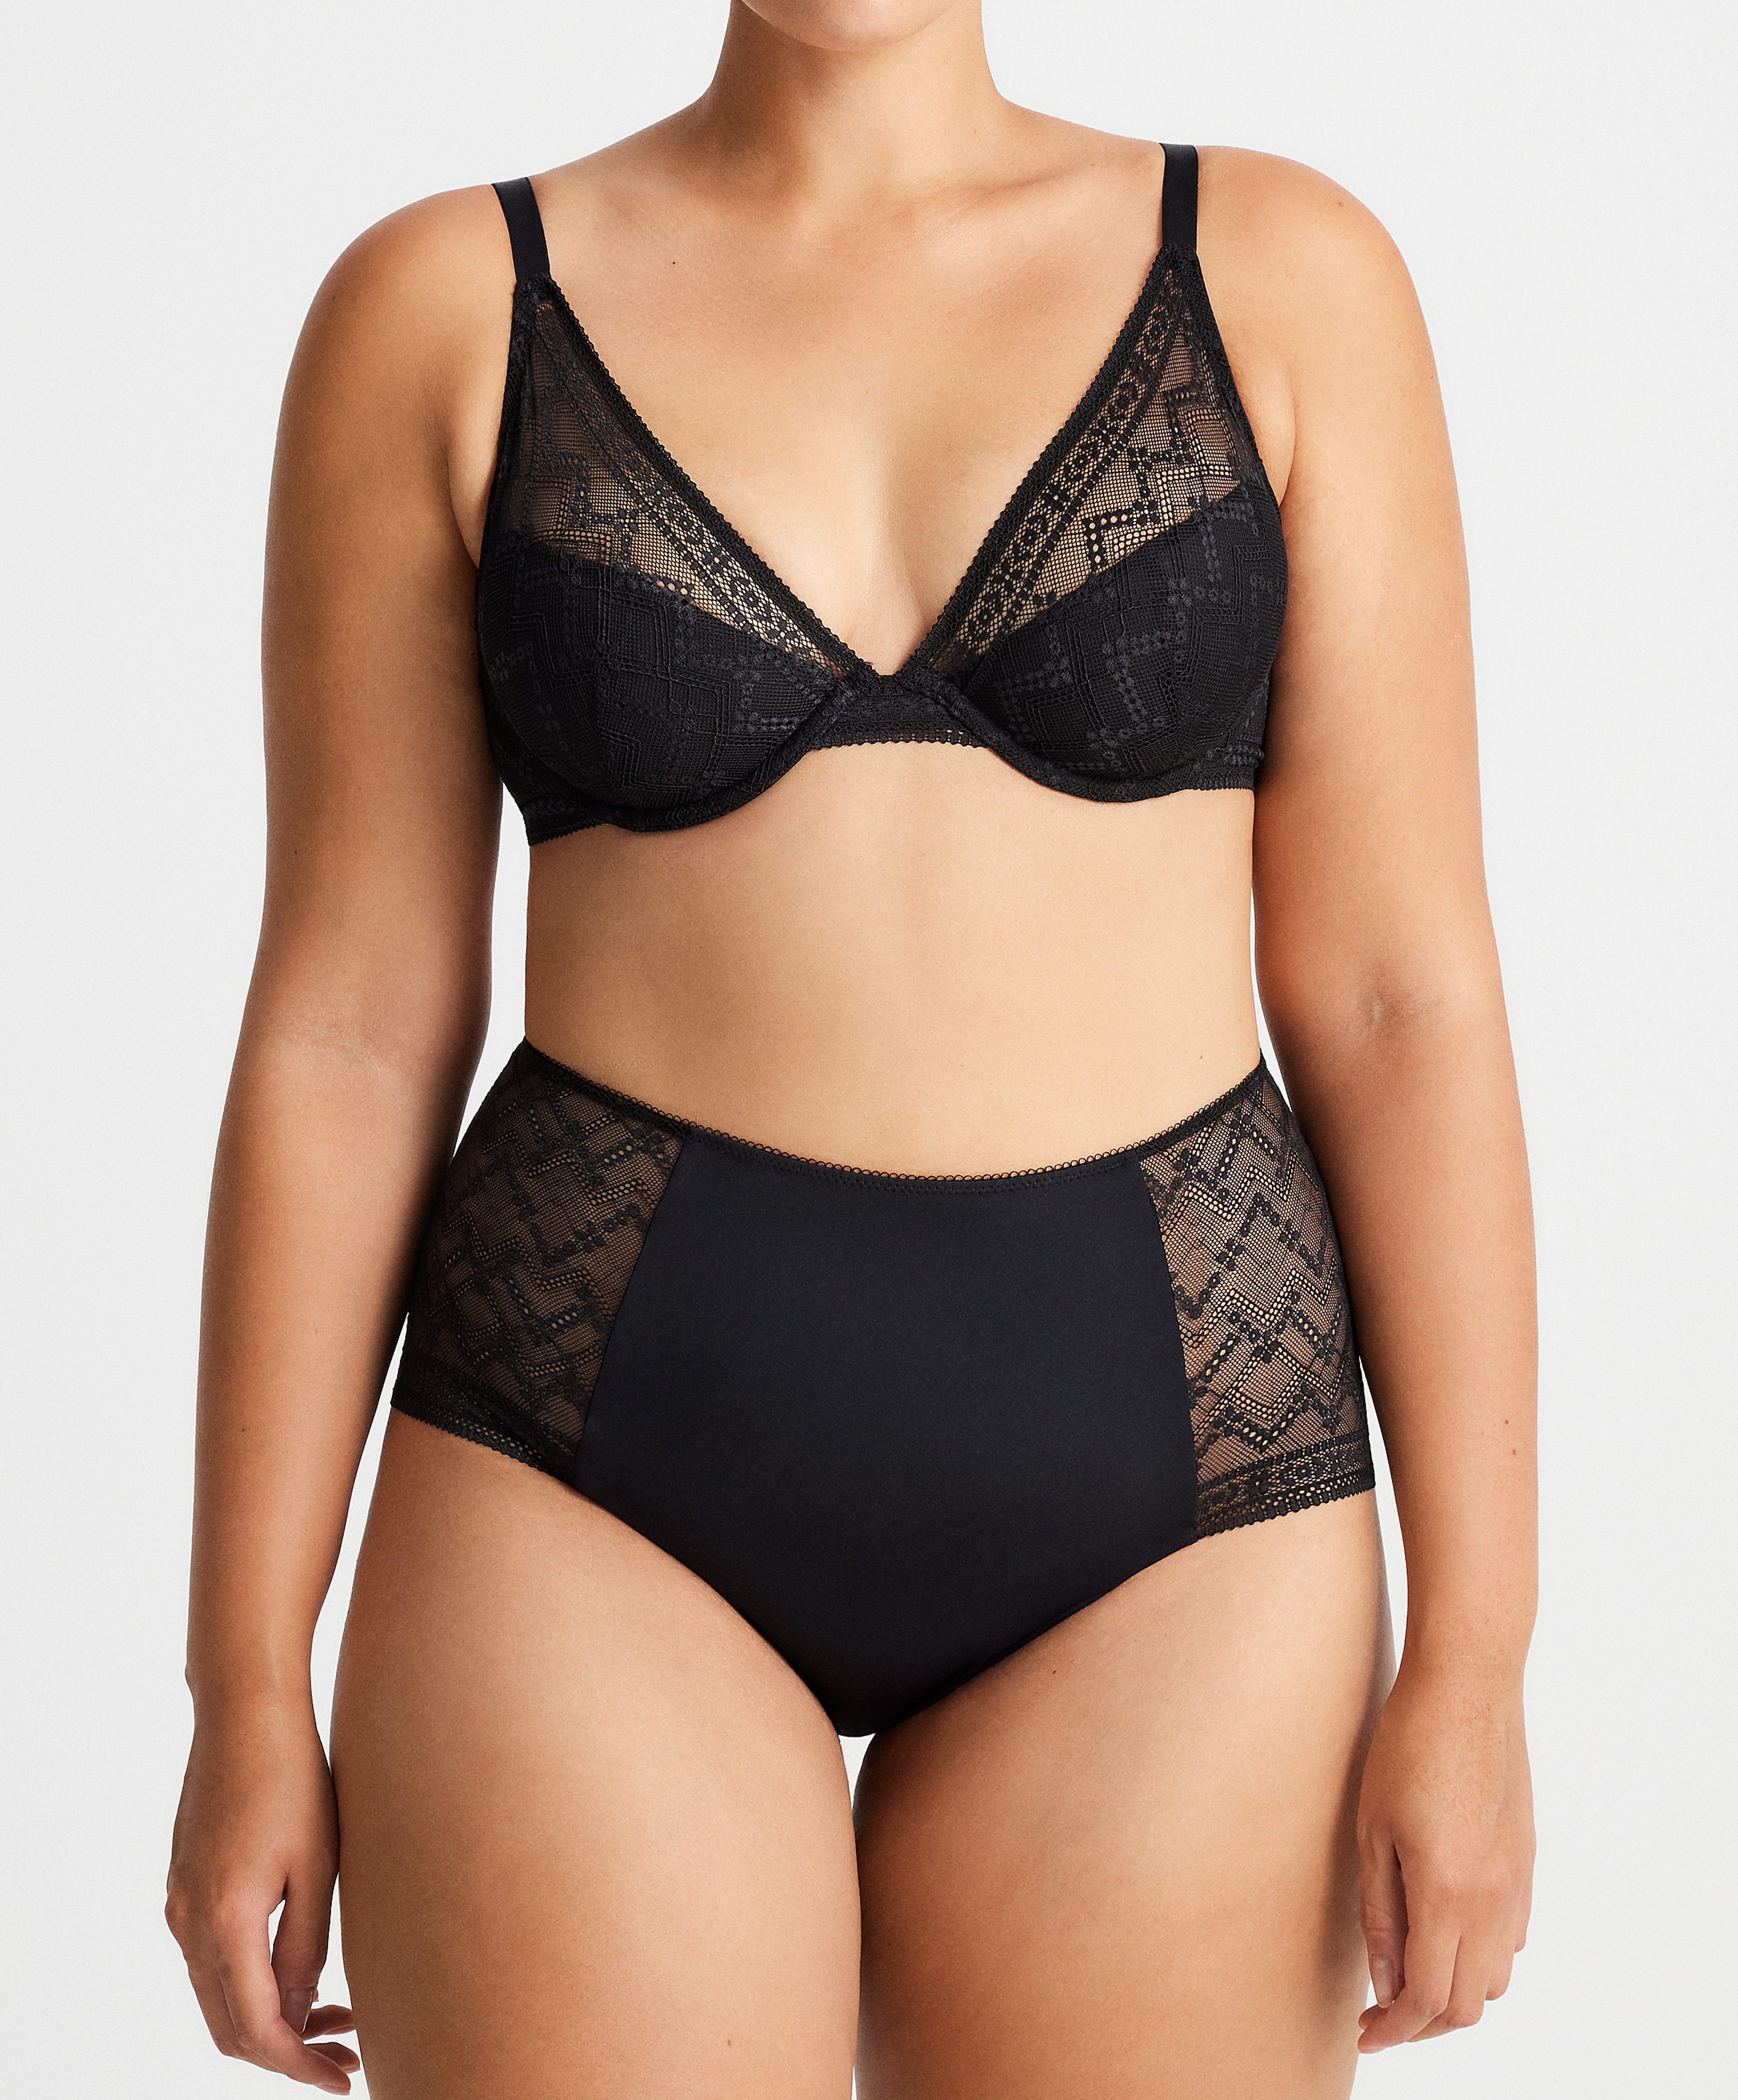 High-waisted floral lace classic briefs